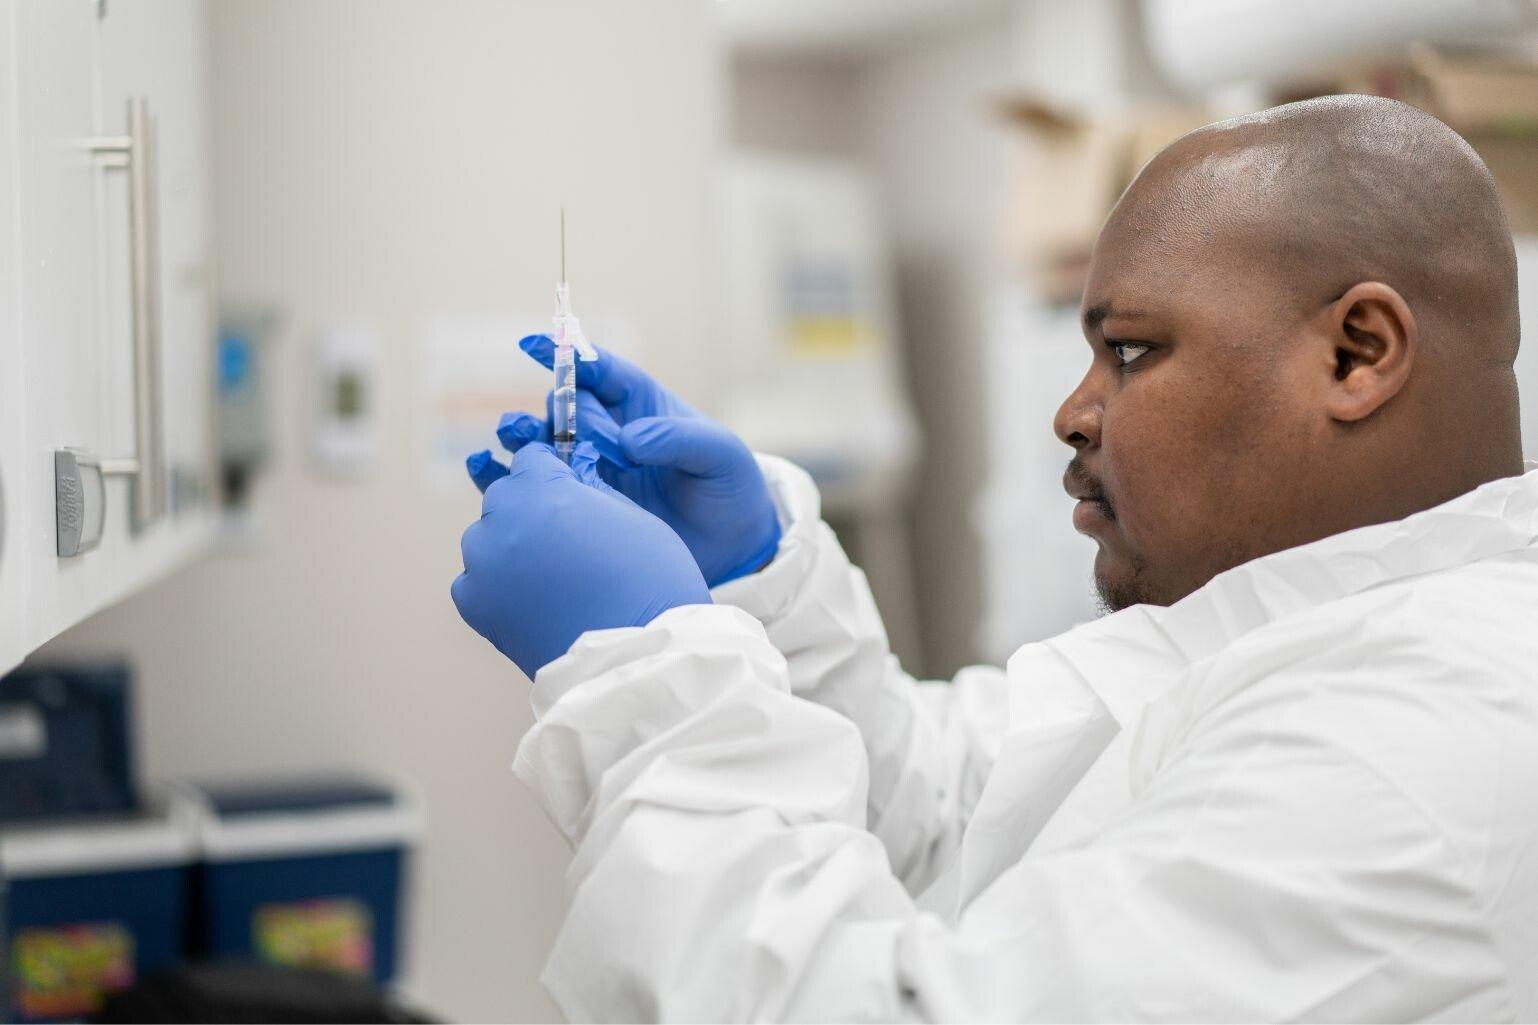 A man wearing a white lab coat and blue gloves is holding and examining a vaccination needle in a laboratory